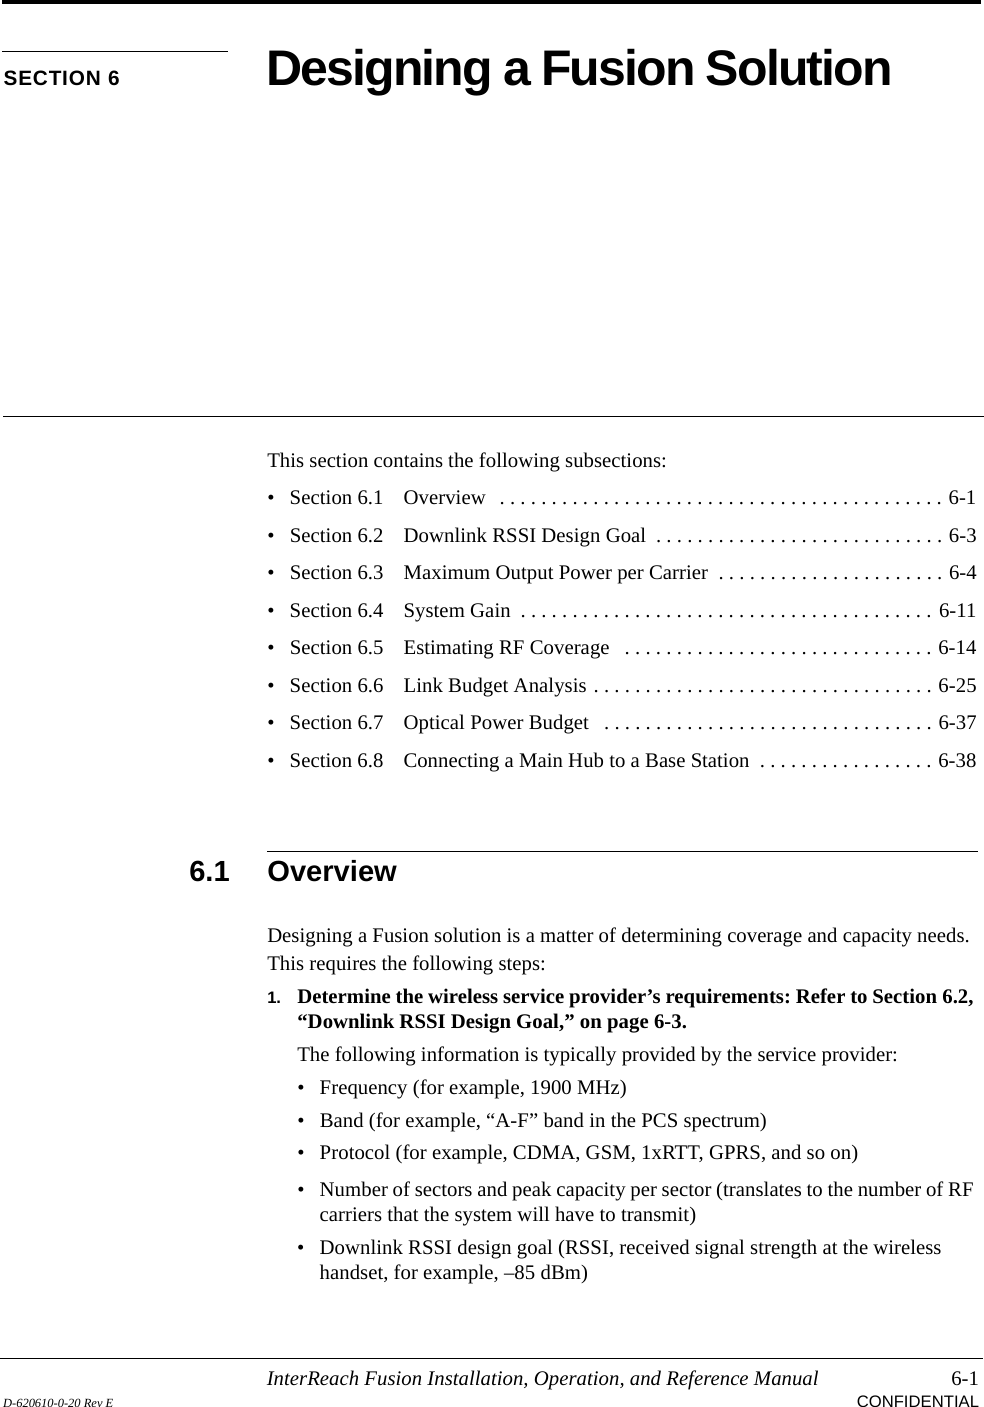 InterReach Fusion Installation, Operation, and Reference Manual 6-1D-620610-0-20 Rev E CONFIDENTIALSECTION 6 Designing a Fusion SolutionThis section contains the following subsections:• Section 6.1   Overview   . . . . . . . . . . . . . . . . . . . . . . . . . . . . . . . . . . . . . . . . . . . 6-1• Section 6.2   Downlink RSSI Design Goal  . . . . . . . . . . . . . . . . . . . . . . . . . . . . 6-3• Section 6.3   Maximum Output Power per Carrier  . . . . . . . . . . . . . . . . . . . . . . 6-4• Section 6.4   System Gain  . . . . . . . . . . . . . . . . . . . . . . . . . . . . . . . . . . . . . . . . 6-11• Section 6.5   Estimating RF Coverage   . . . . . . . . . . . . . . . . . . . . . . . . . . . . . . 6-14• Section 6.6   Link Budget Analysis . . . . . . . . . . . . . . . . . . . . . . . . . . . . . . . . . 6-25• Section 6.7   Optical Power Budget   . . . . . . . . . . . . . . . . . . . . . . . . . . . . . . . . 6-37• Section 6.8   Connecting a Main Hub to a Base Station  . . . . . . . . . . . . . . . . . 6-386.1 OverviewDesigning a Fusion solution is a matter of determining coverage and capacity needs. This requires the following steps:1. Determine the wireless service provider’s requirements: Refer to Section 6.2, “Downlink RSSI Design Goal,” on page 6-3.The following information is typically provided by the service provider:• Frequency (for example, 1900 MHz)• Band (for example, “A-F” band in the PCS spectrum)• Protocol (for example, CDMA, GSM, 1xRTT, GPRS, and so on)• Number of sectors and peak capacity per sector (translates to the number of RF carriers that the system will have to transmit)• Downlink RSSI design goal (RSSI, received signal strength at the wireless handset, for example, –85 dBm)